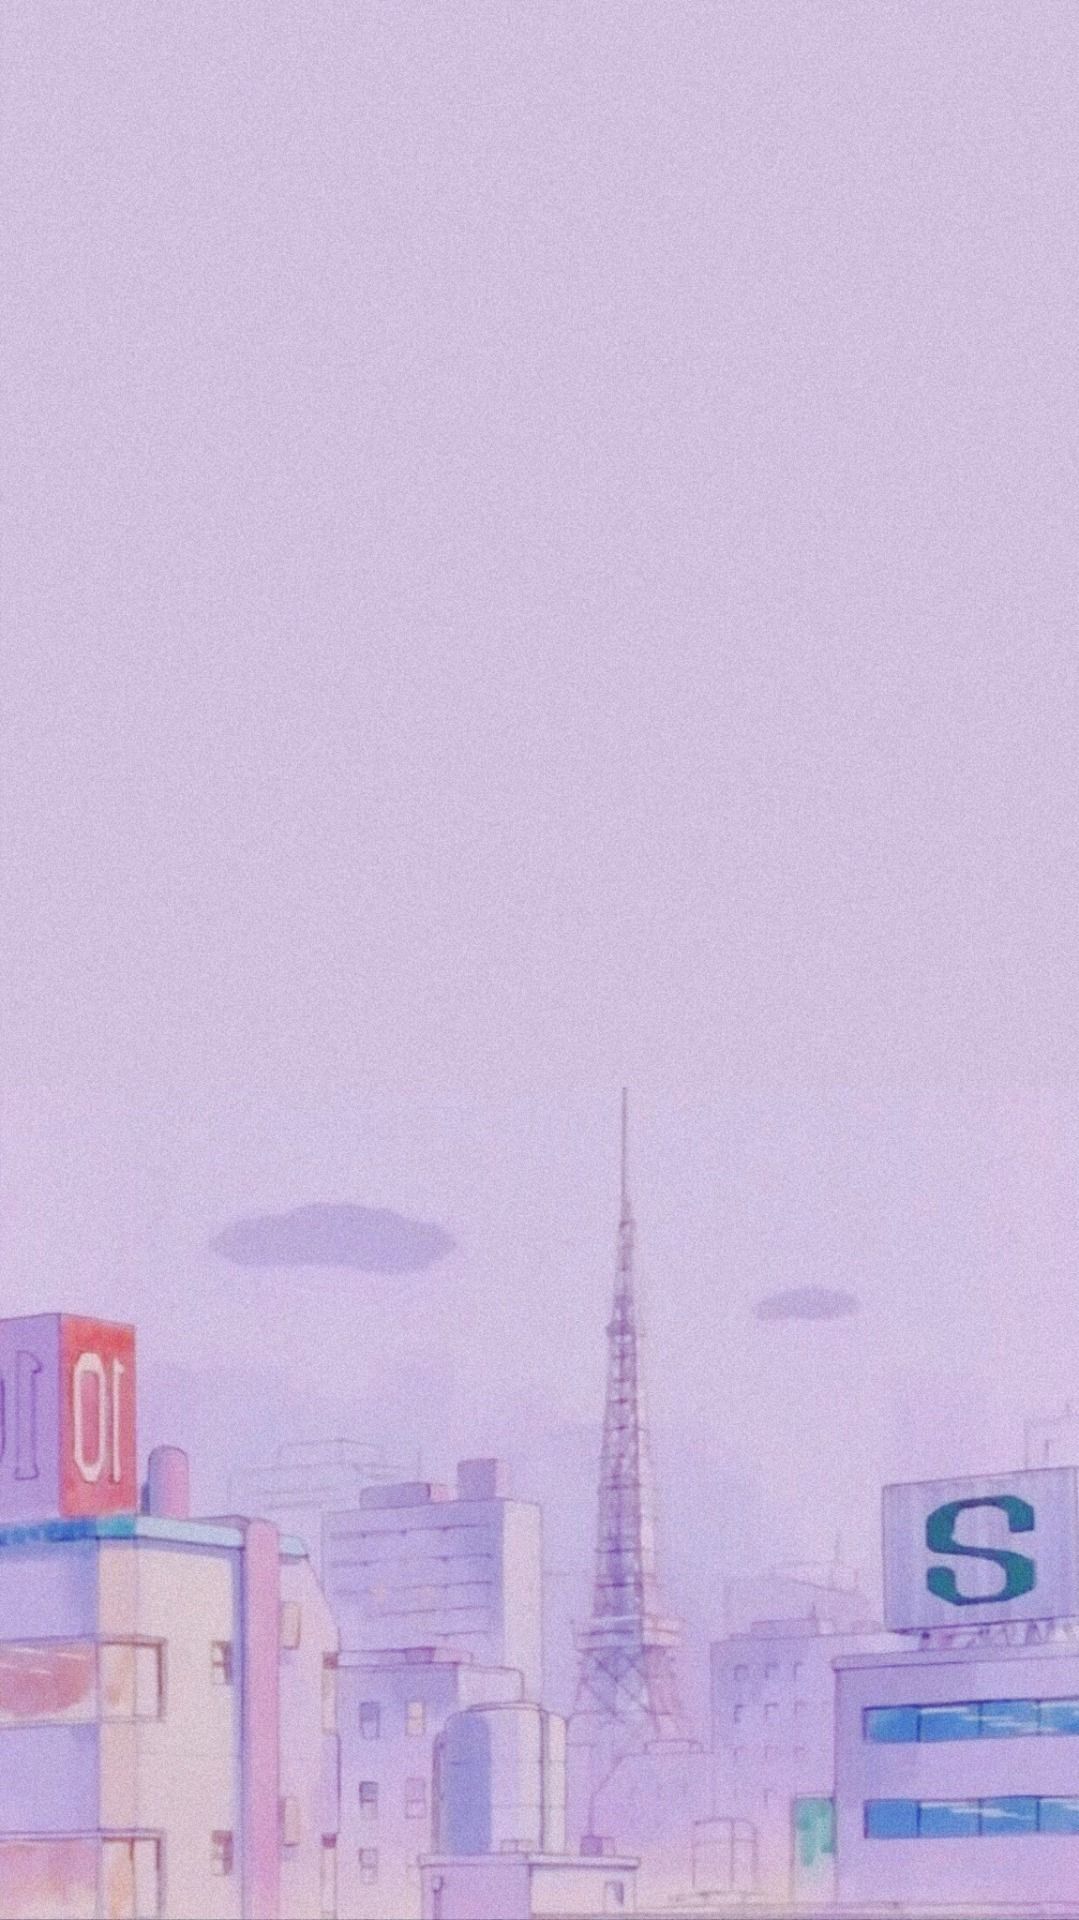 100+] Purple Aesthetic Anime Wallpapers | Wallpapers.com